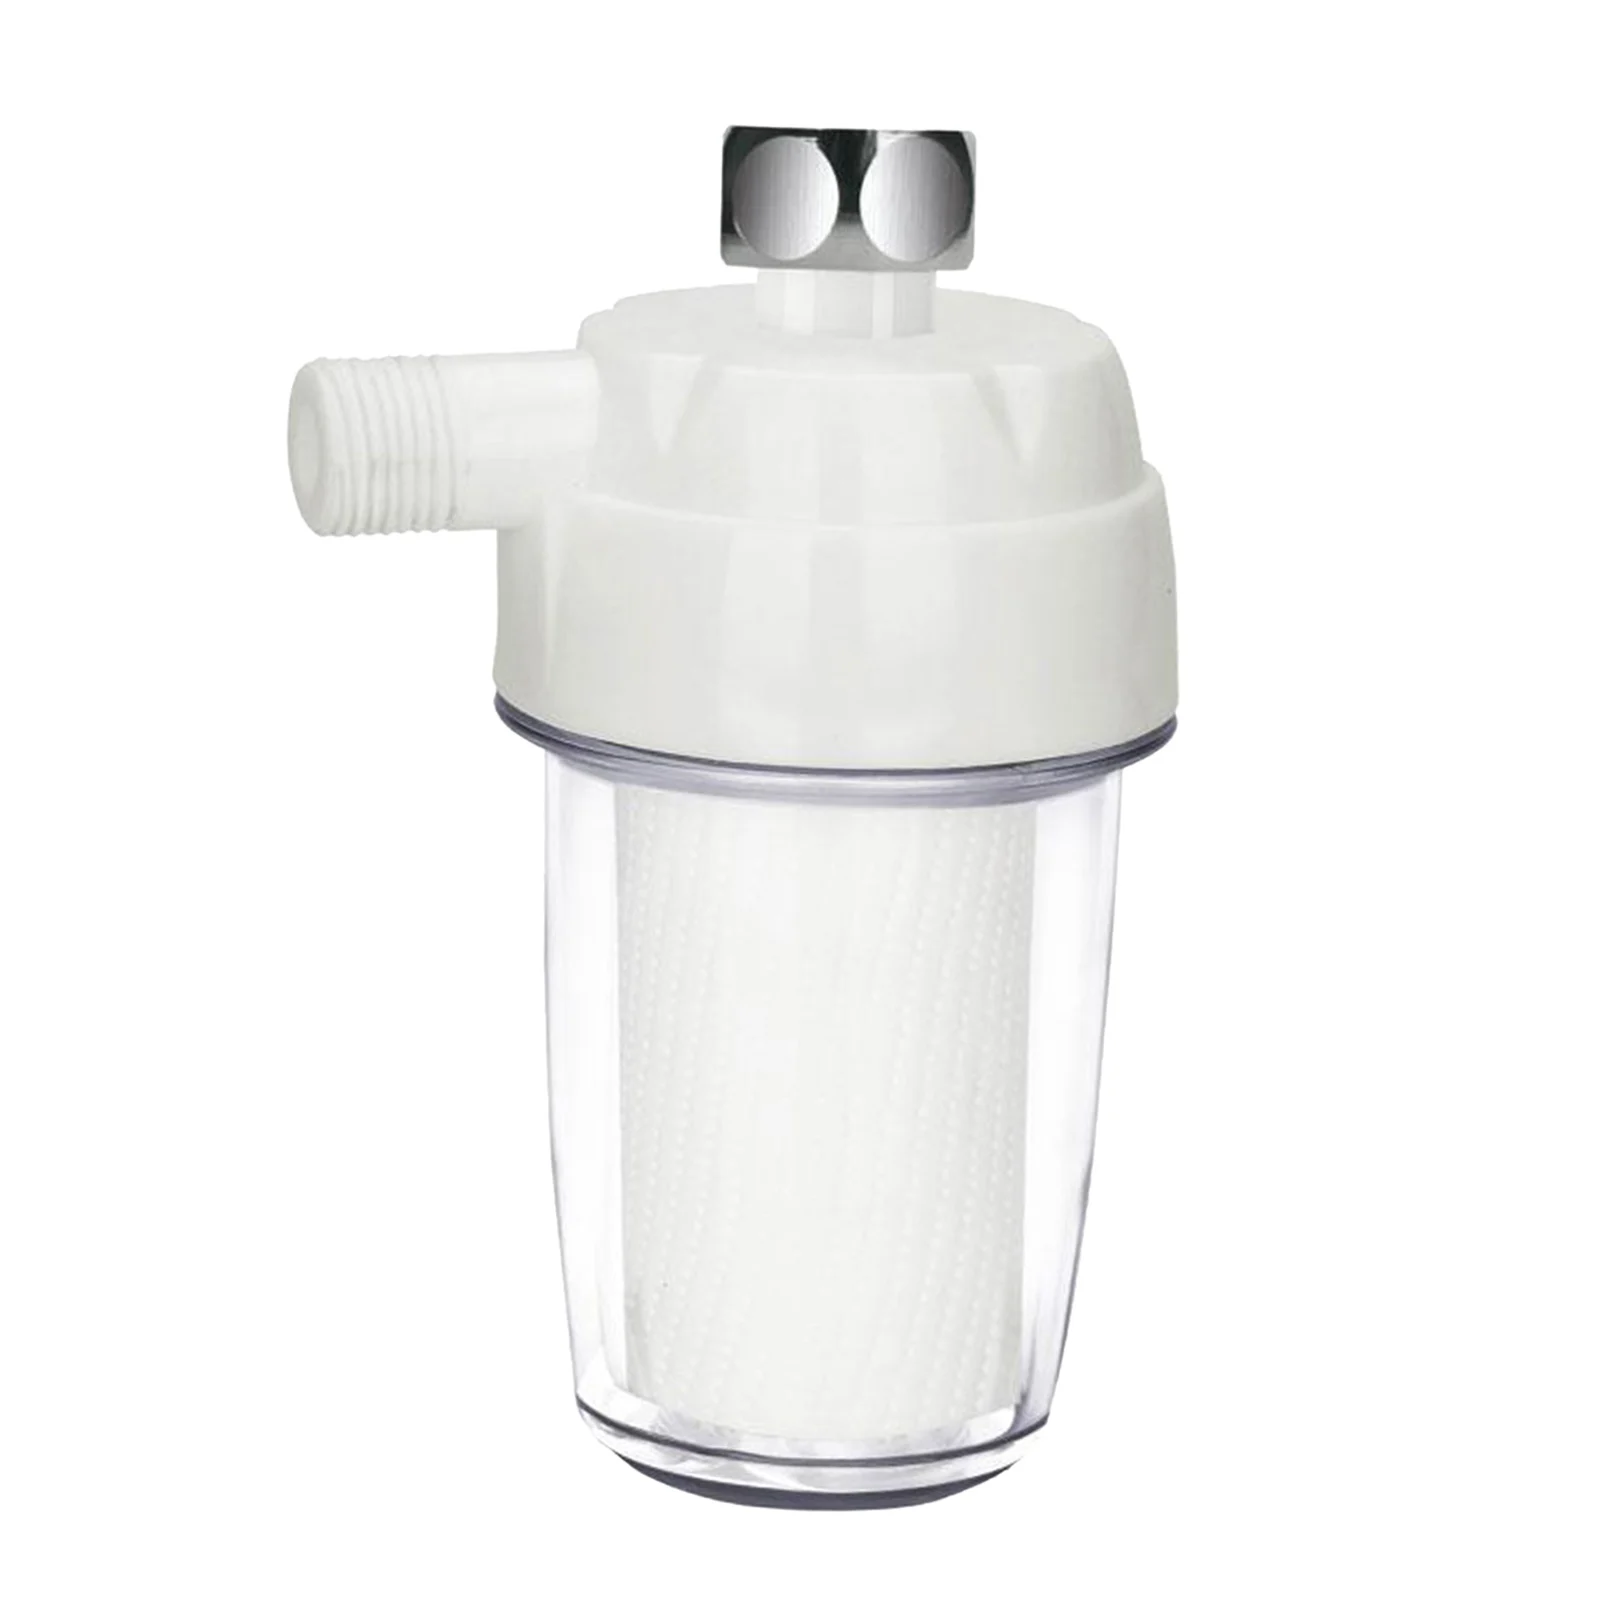 Multi-stage Universal Shower Water Filter Cartridge Reduces Chemicals & Chlorine White 10x14cm